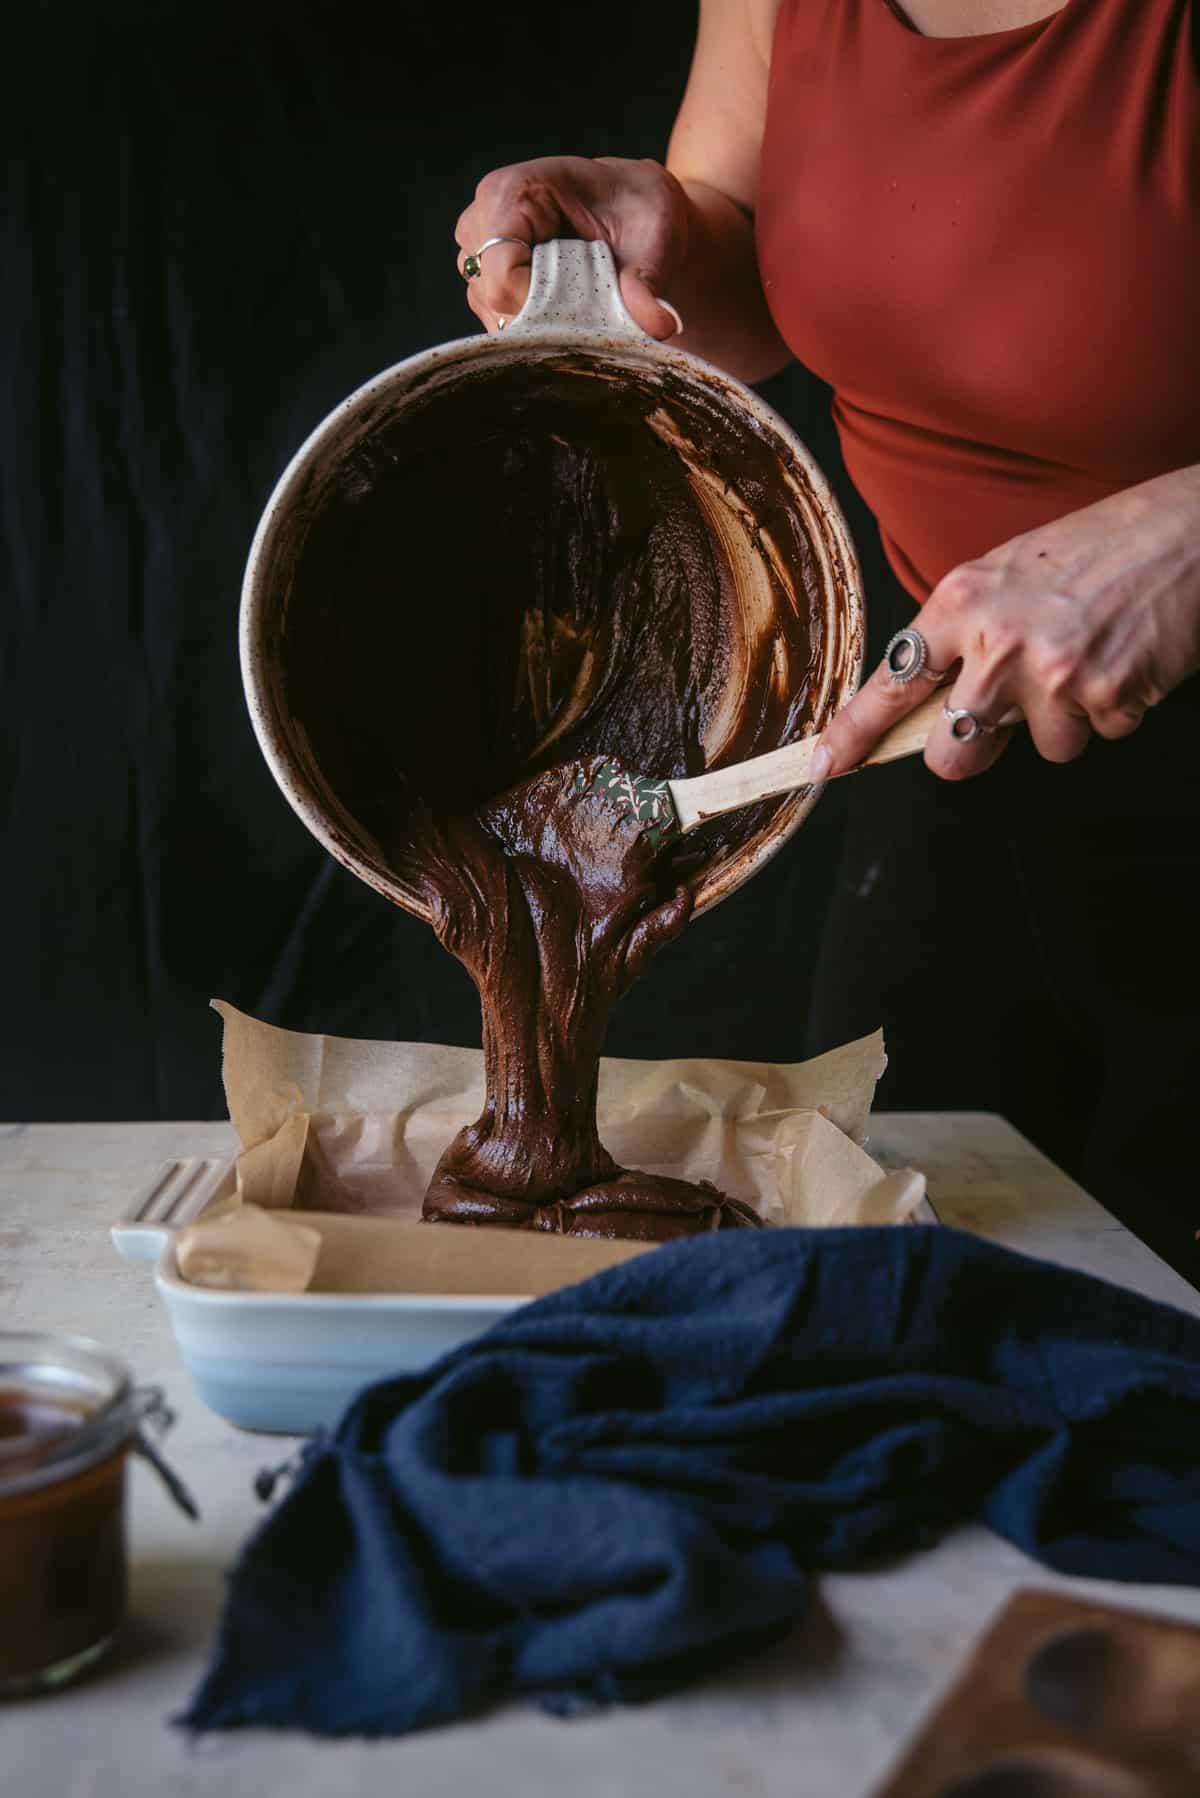 Straight on shot of brownie batter being scraped out of a mixing bowl into a blue 8x8 ceramic pan lined with parchment paper.  Blue linen napkin is on the table in front of the pan.